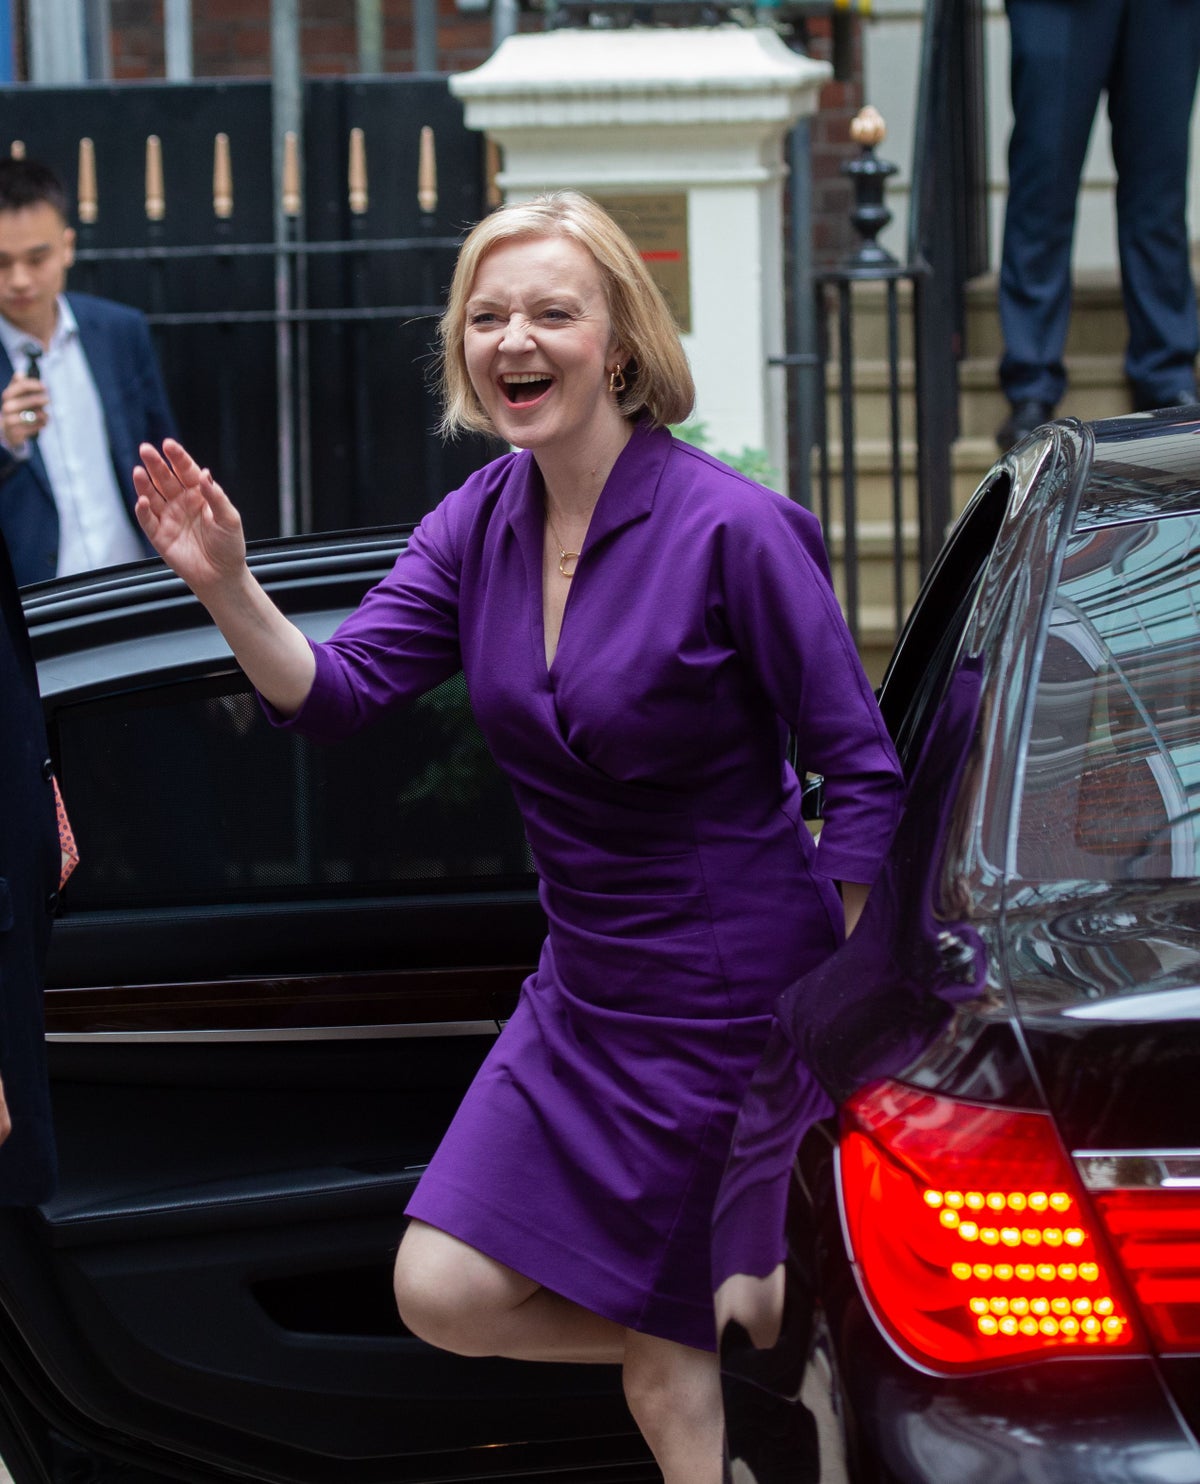 Liz Truss and Boris Johnson to fly to Balmoral separately doubling carbon emissions